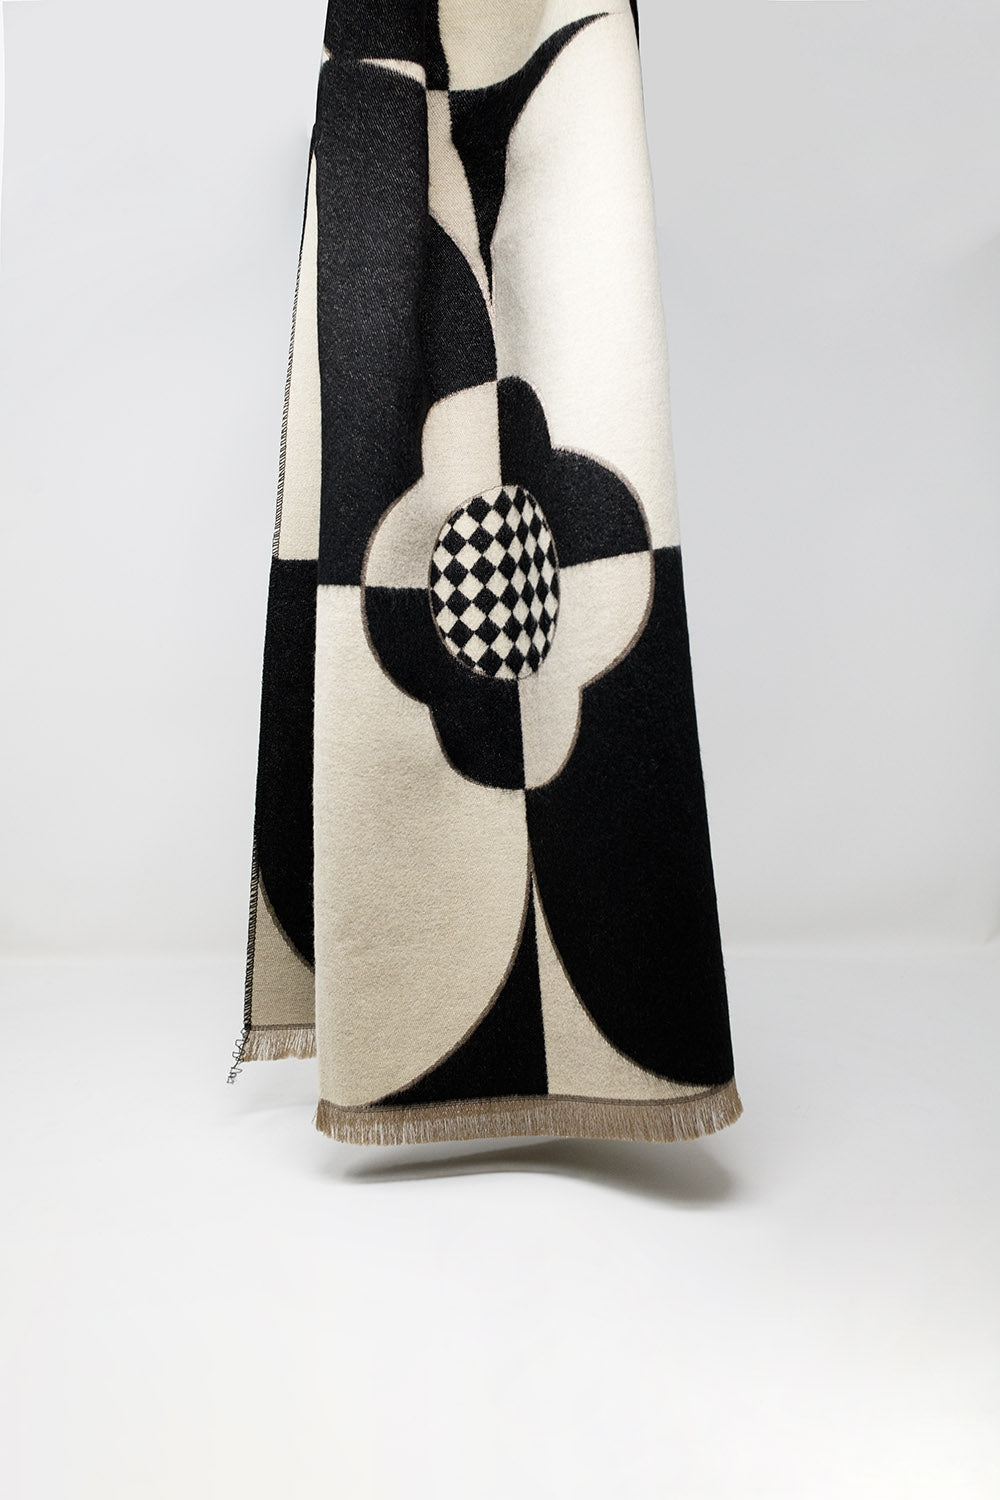 Geometric Black and White Design Scarf With Flower Details